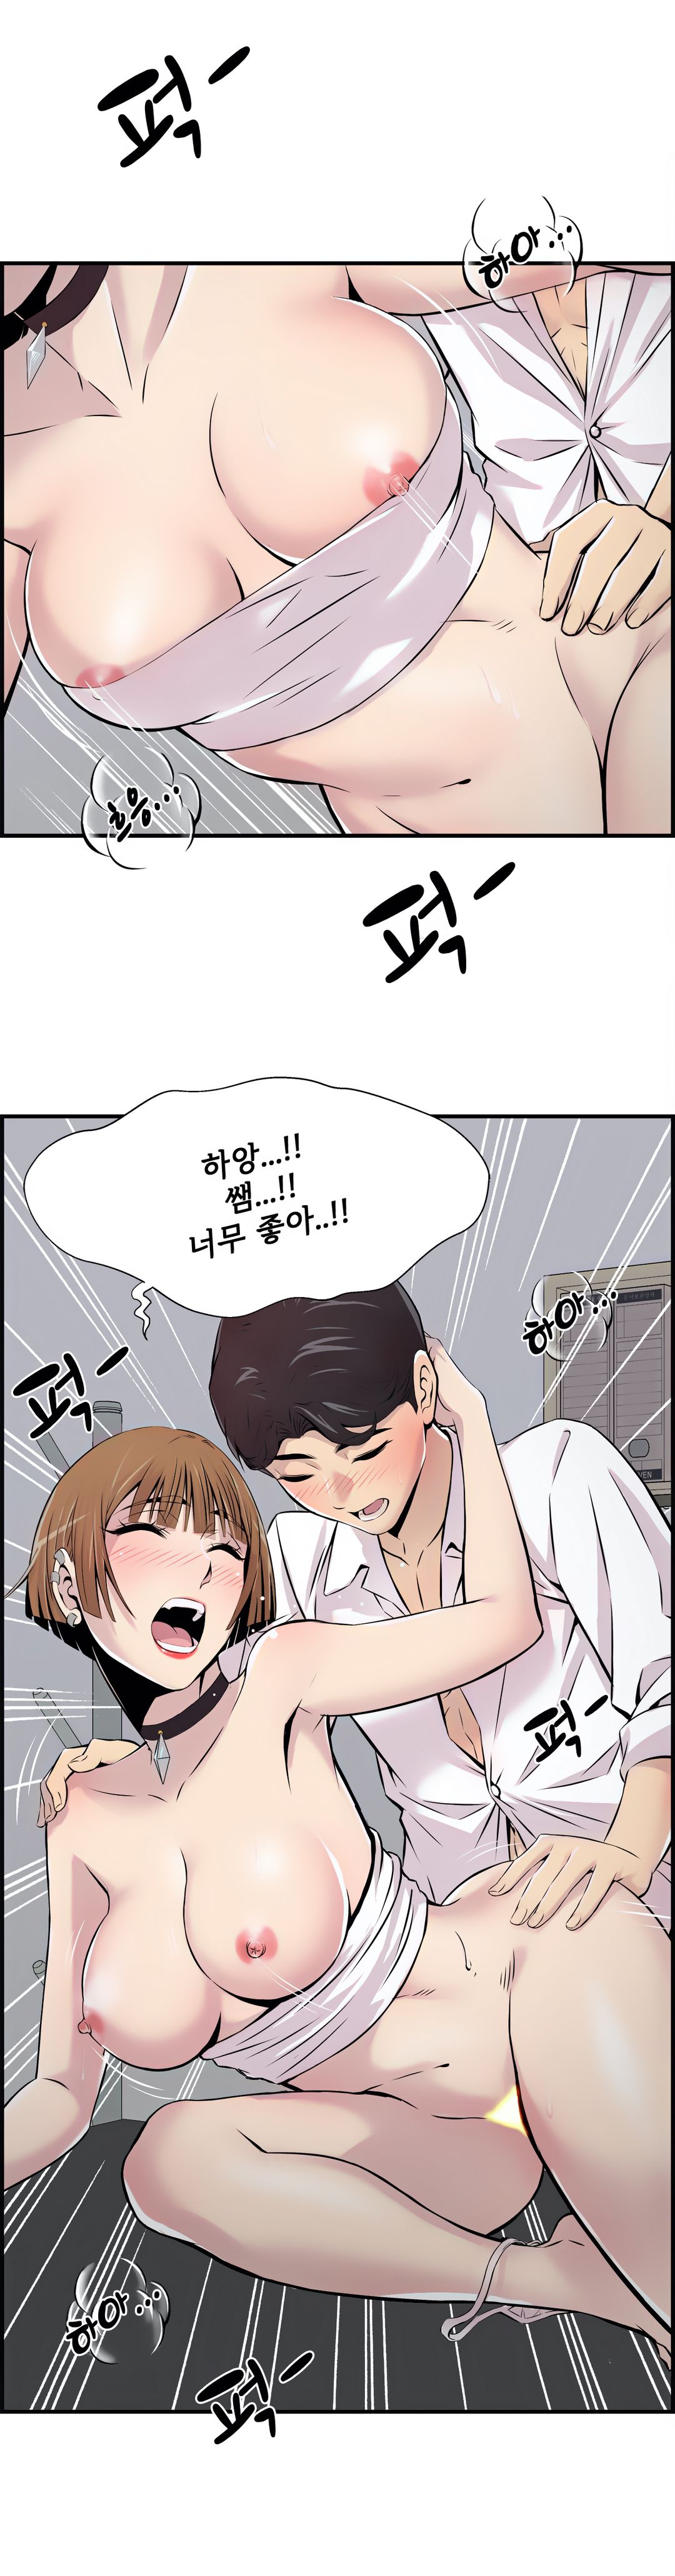 Cram School Scandal Raw - Chapter 3 Page 2